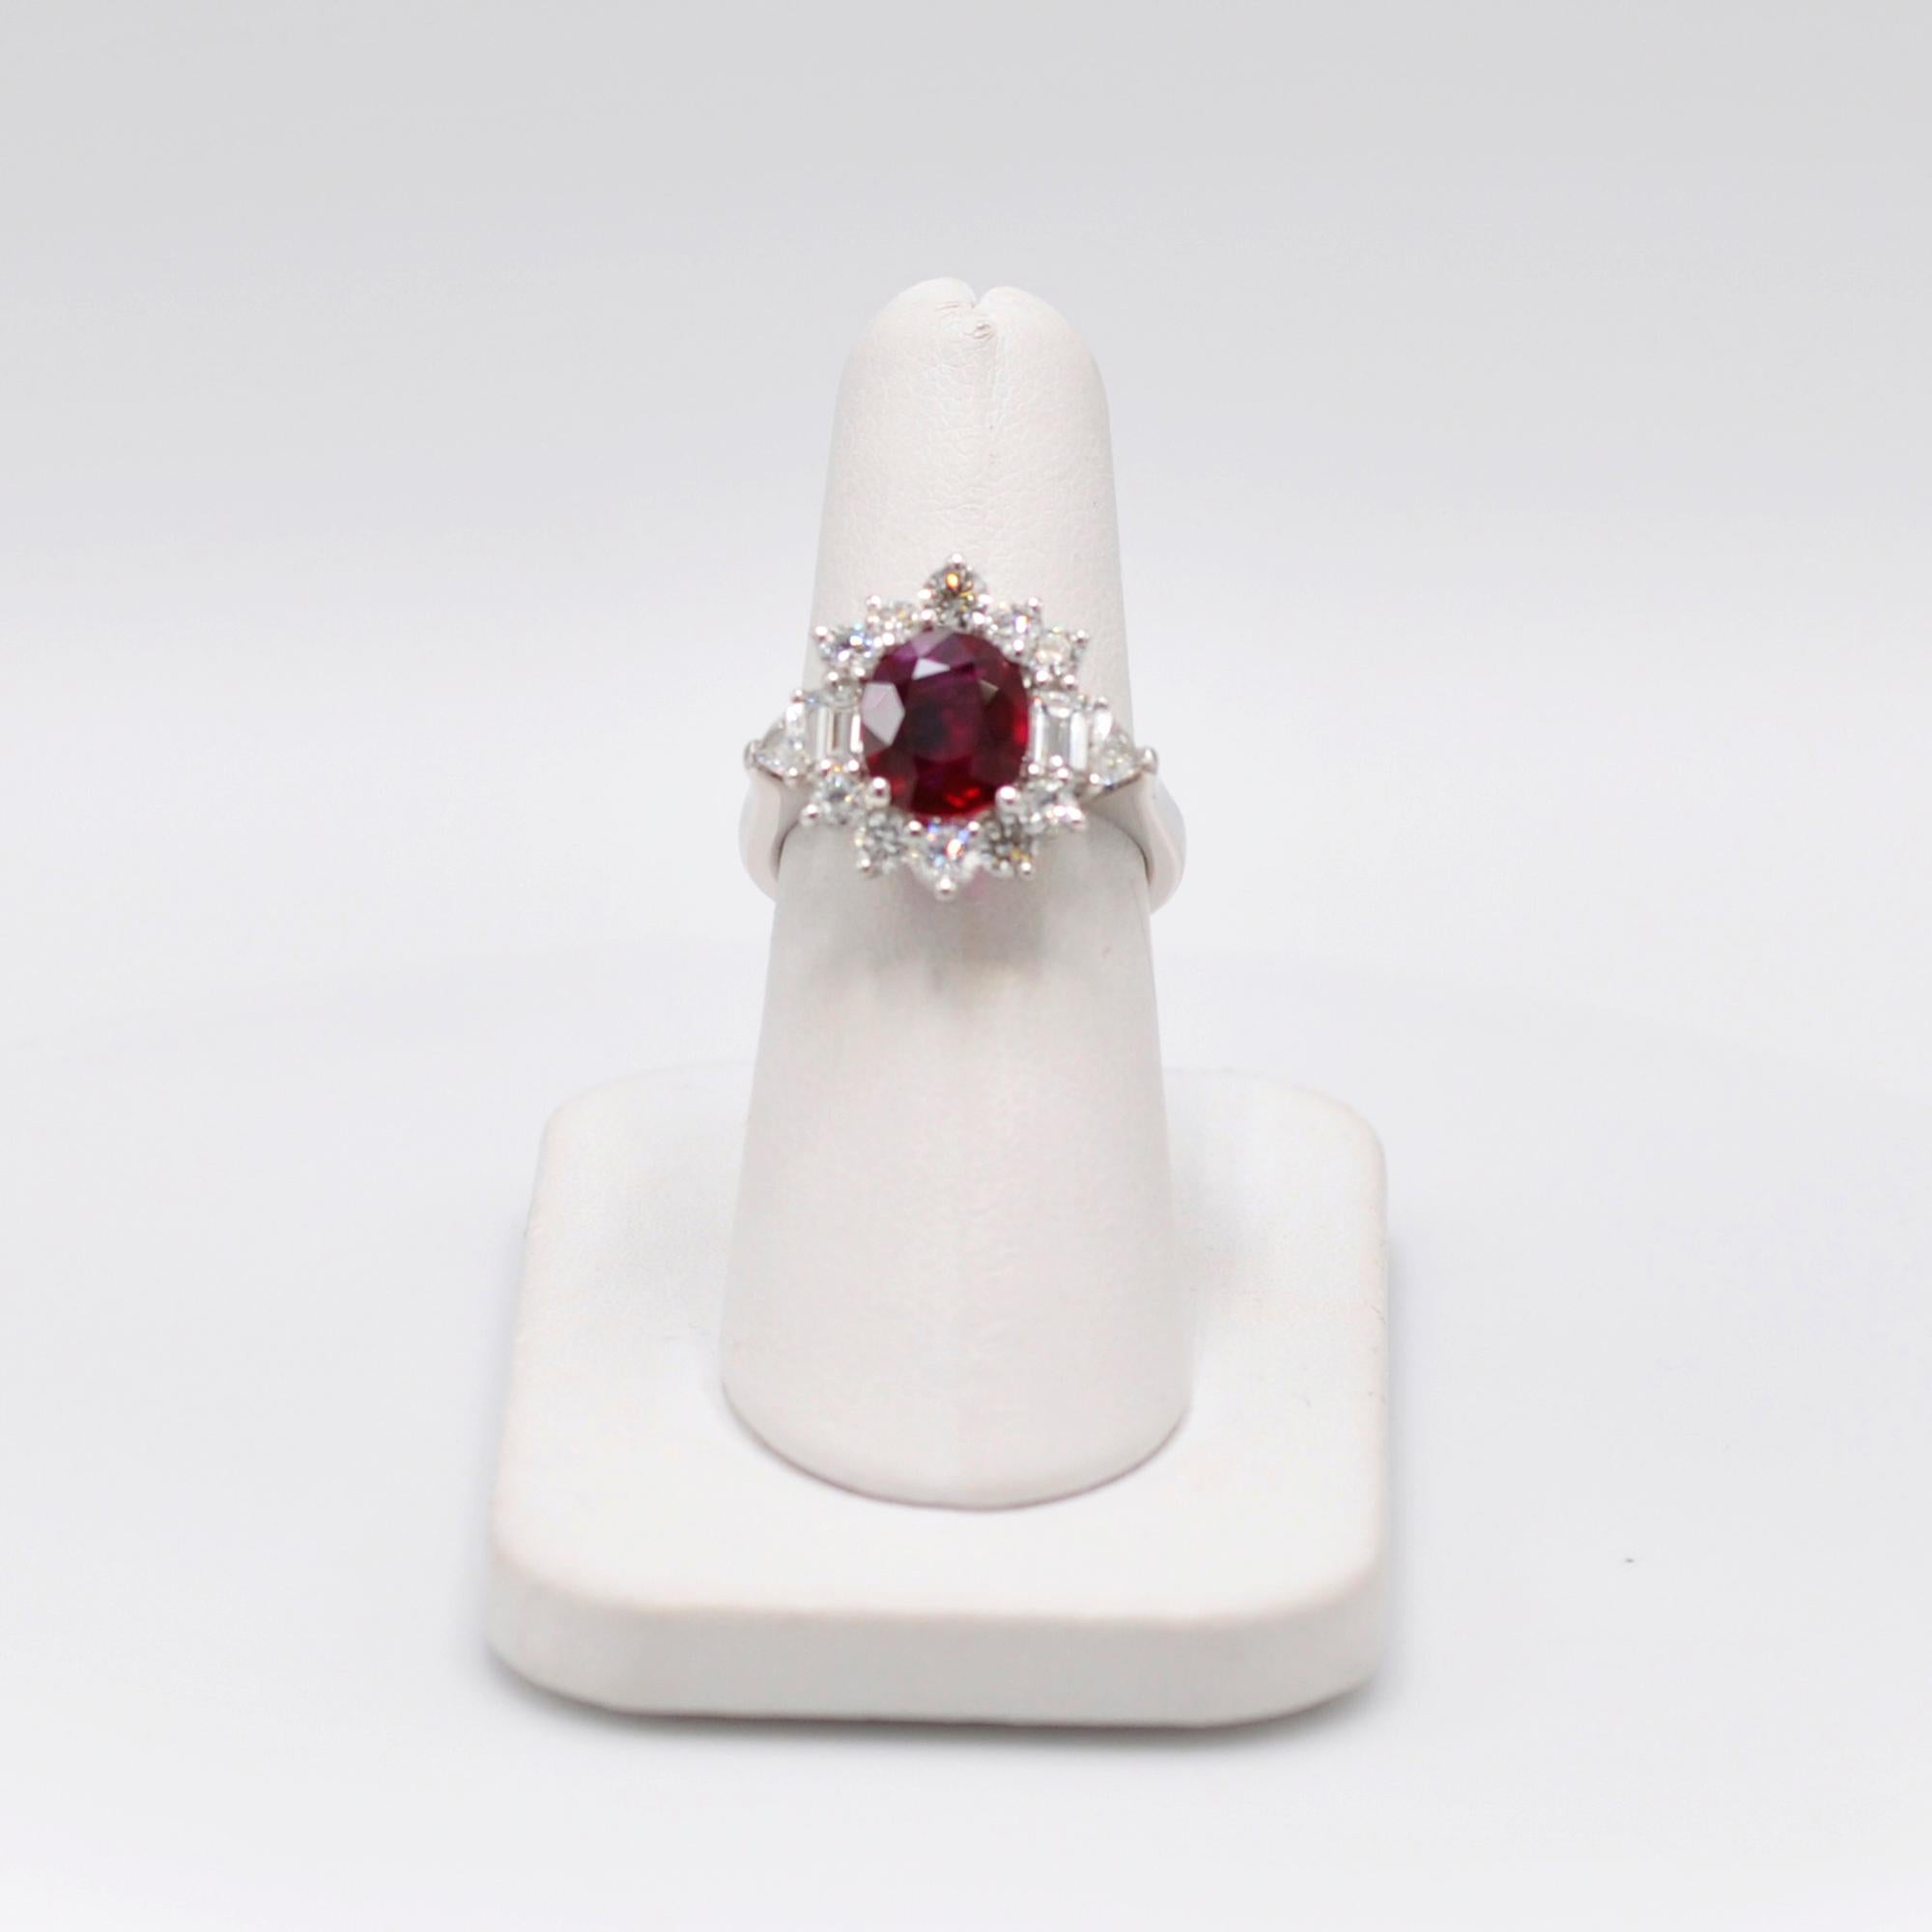 2.01 CT Burma ruby surrounded by .93 CT of round cut diamonds in a platinum setting. 

Stamped ‘Plat’. 

Size 6.5.